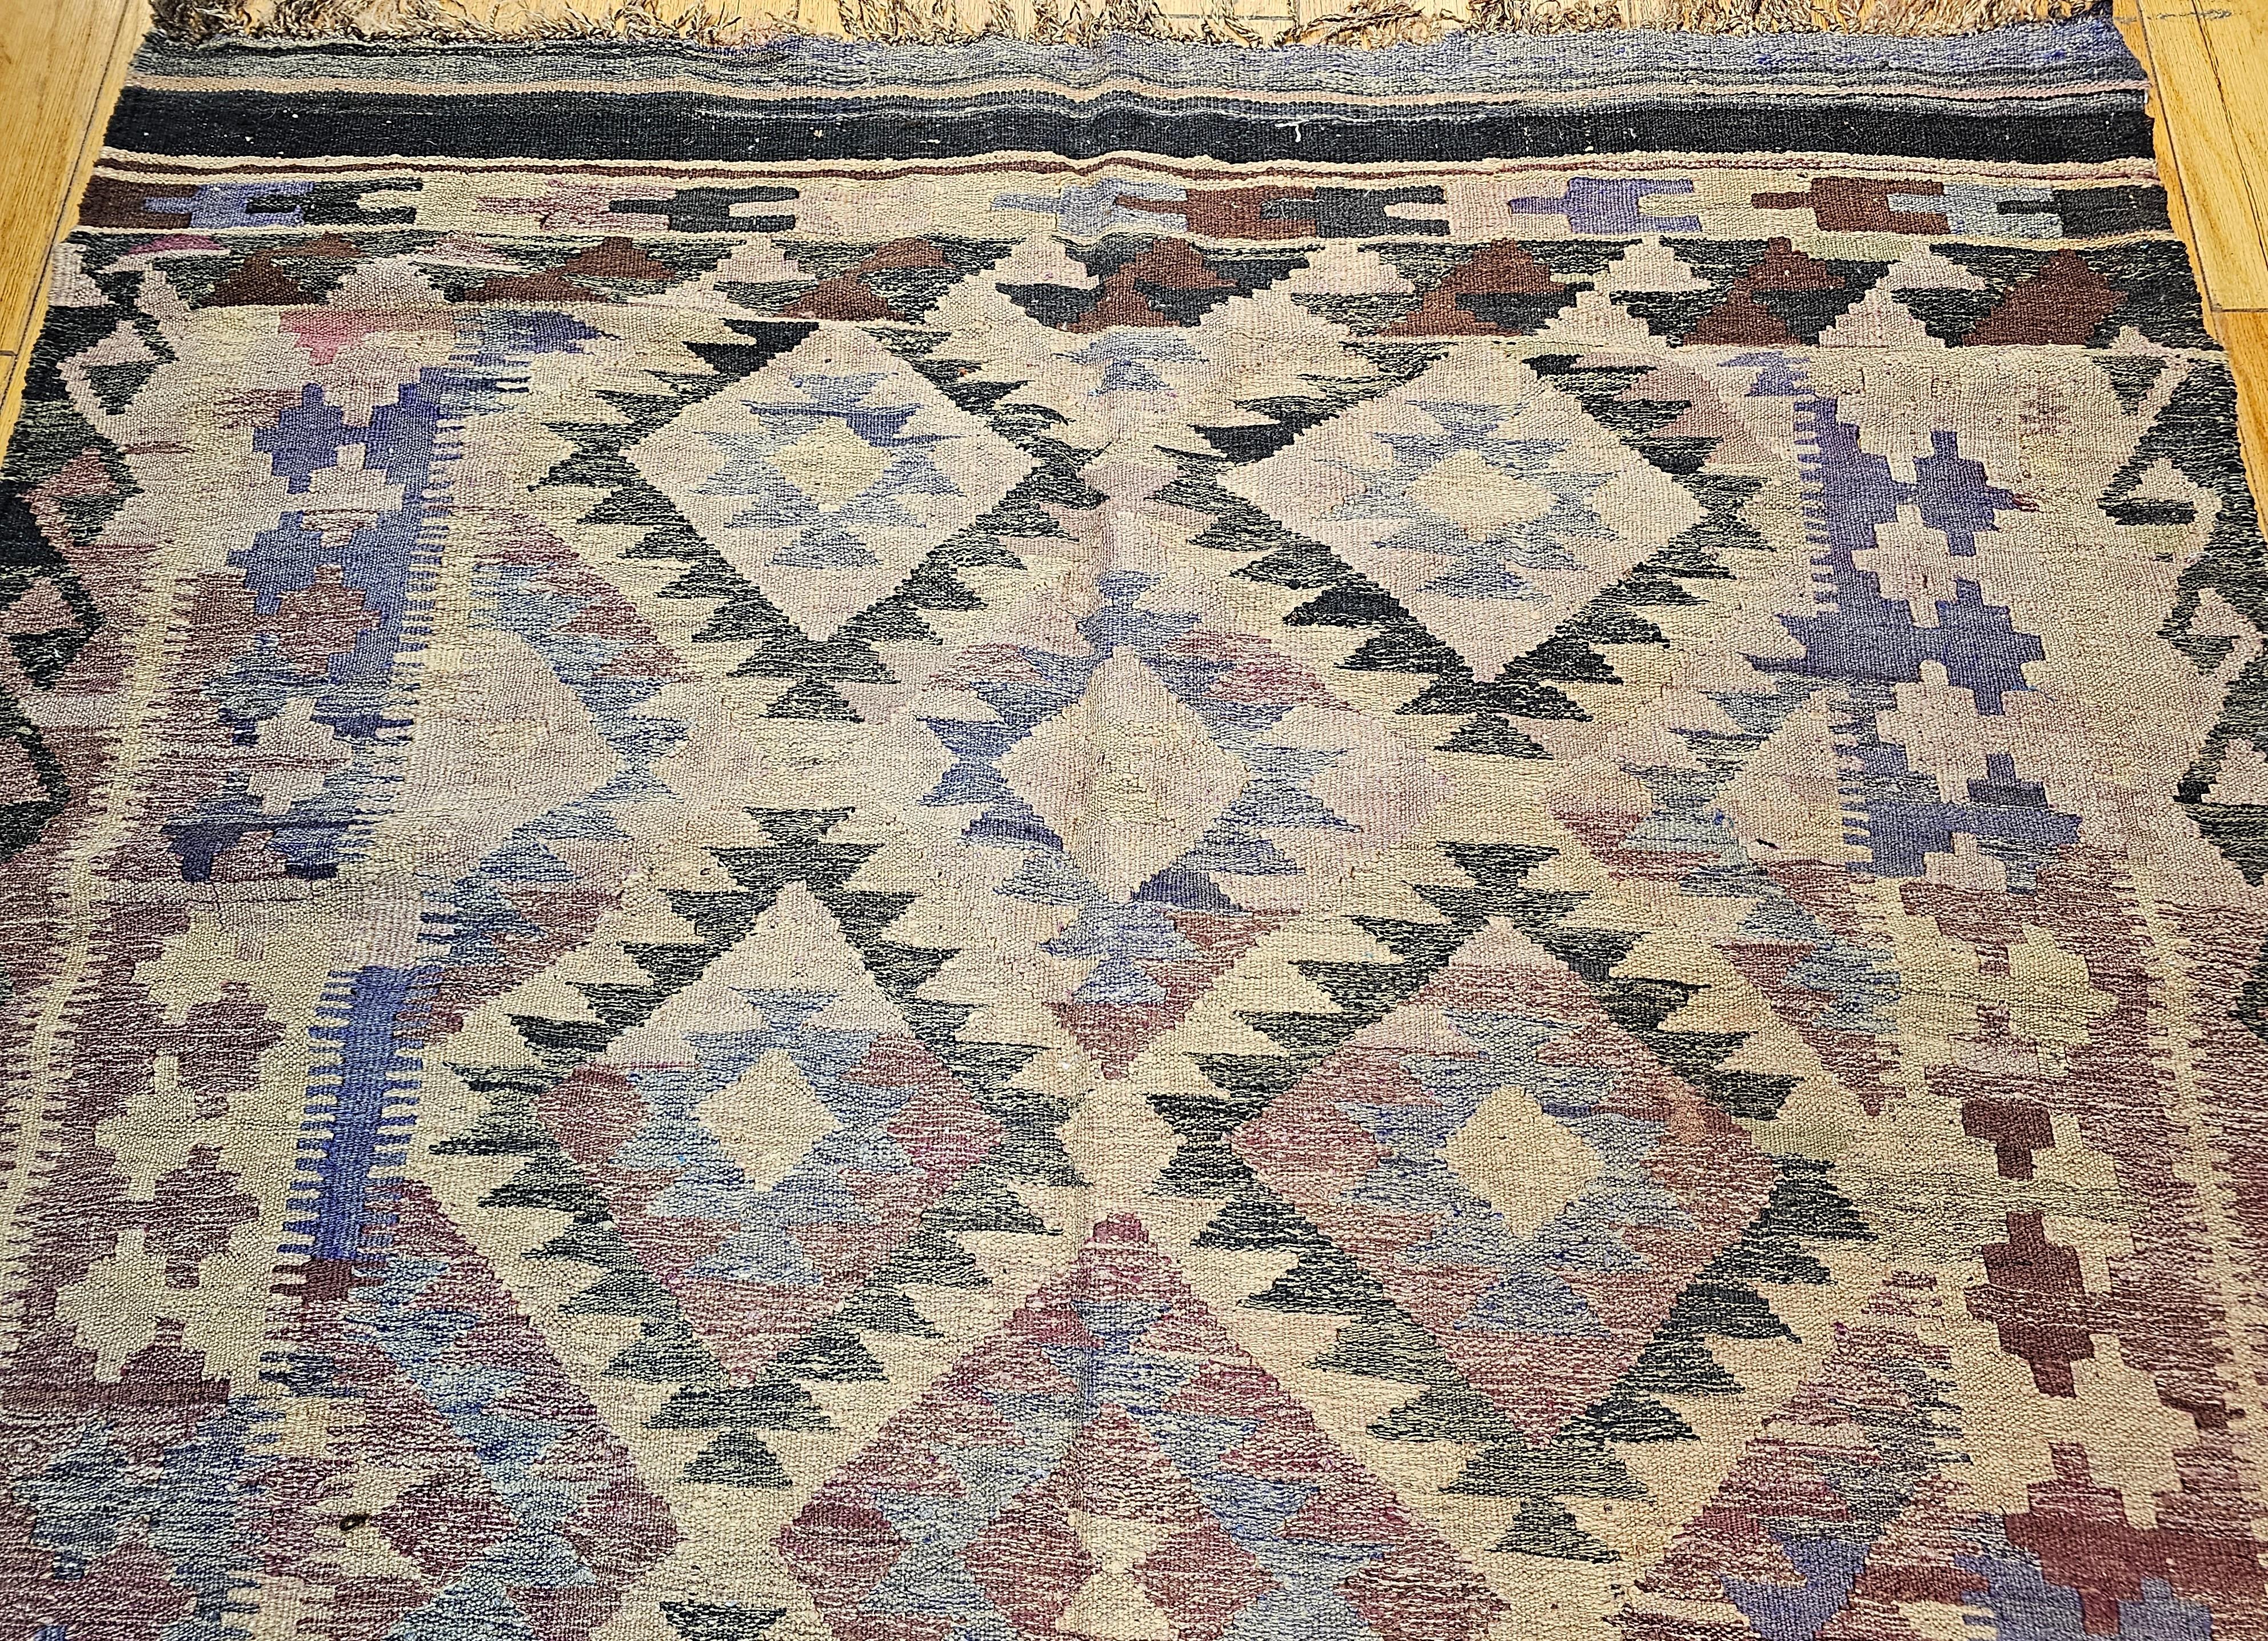 Vintage Kilim in Southwestern Colors and Pattern in Lavender, Brown, Cream, Red In Good Condition For Sale In Barrington, IL